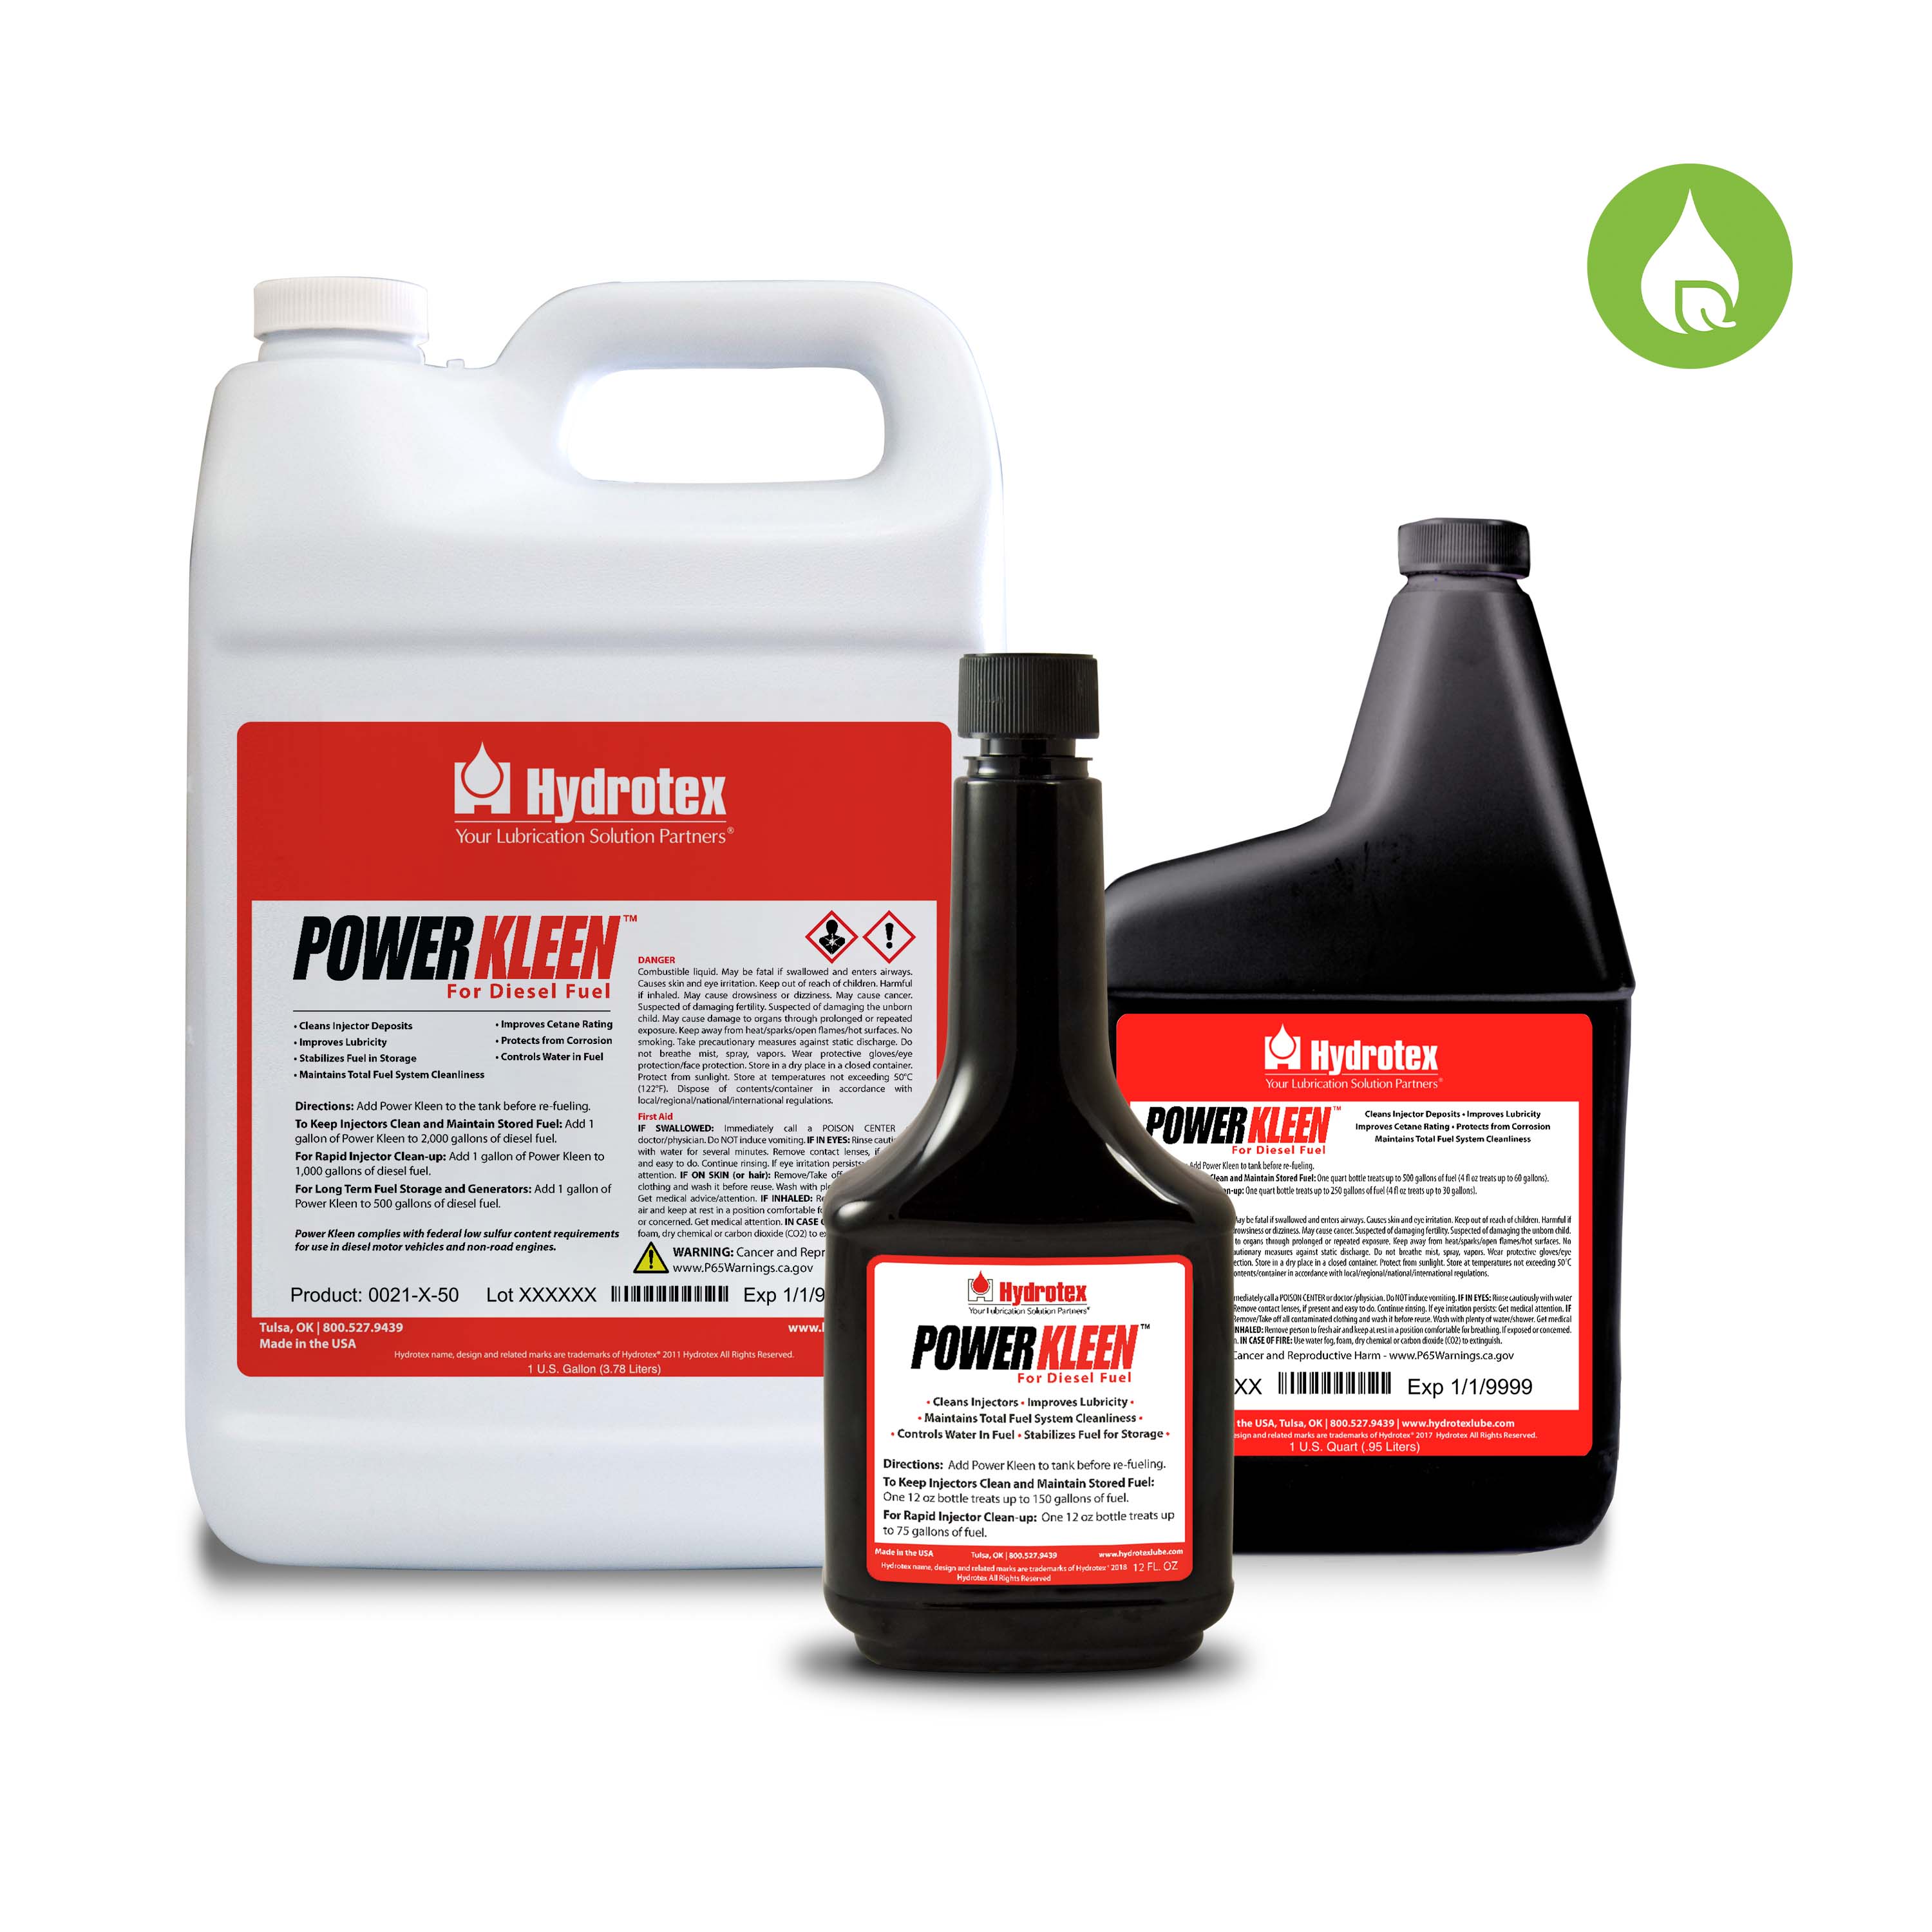 MotorPower Care Injectors & Fuel System Cleaner: Clean, Lubricate, Eliminates Water from Fuel Tank, and Protect for Optimal Performance